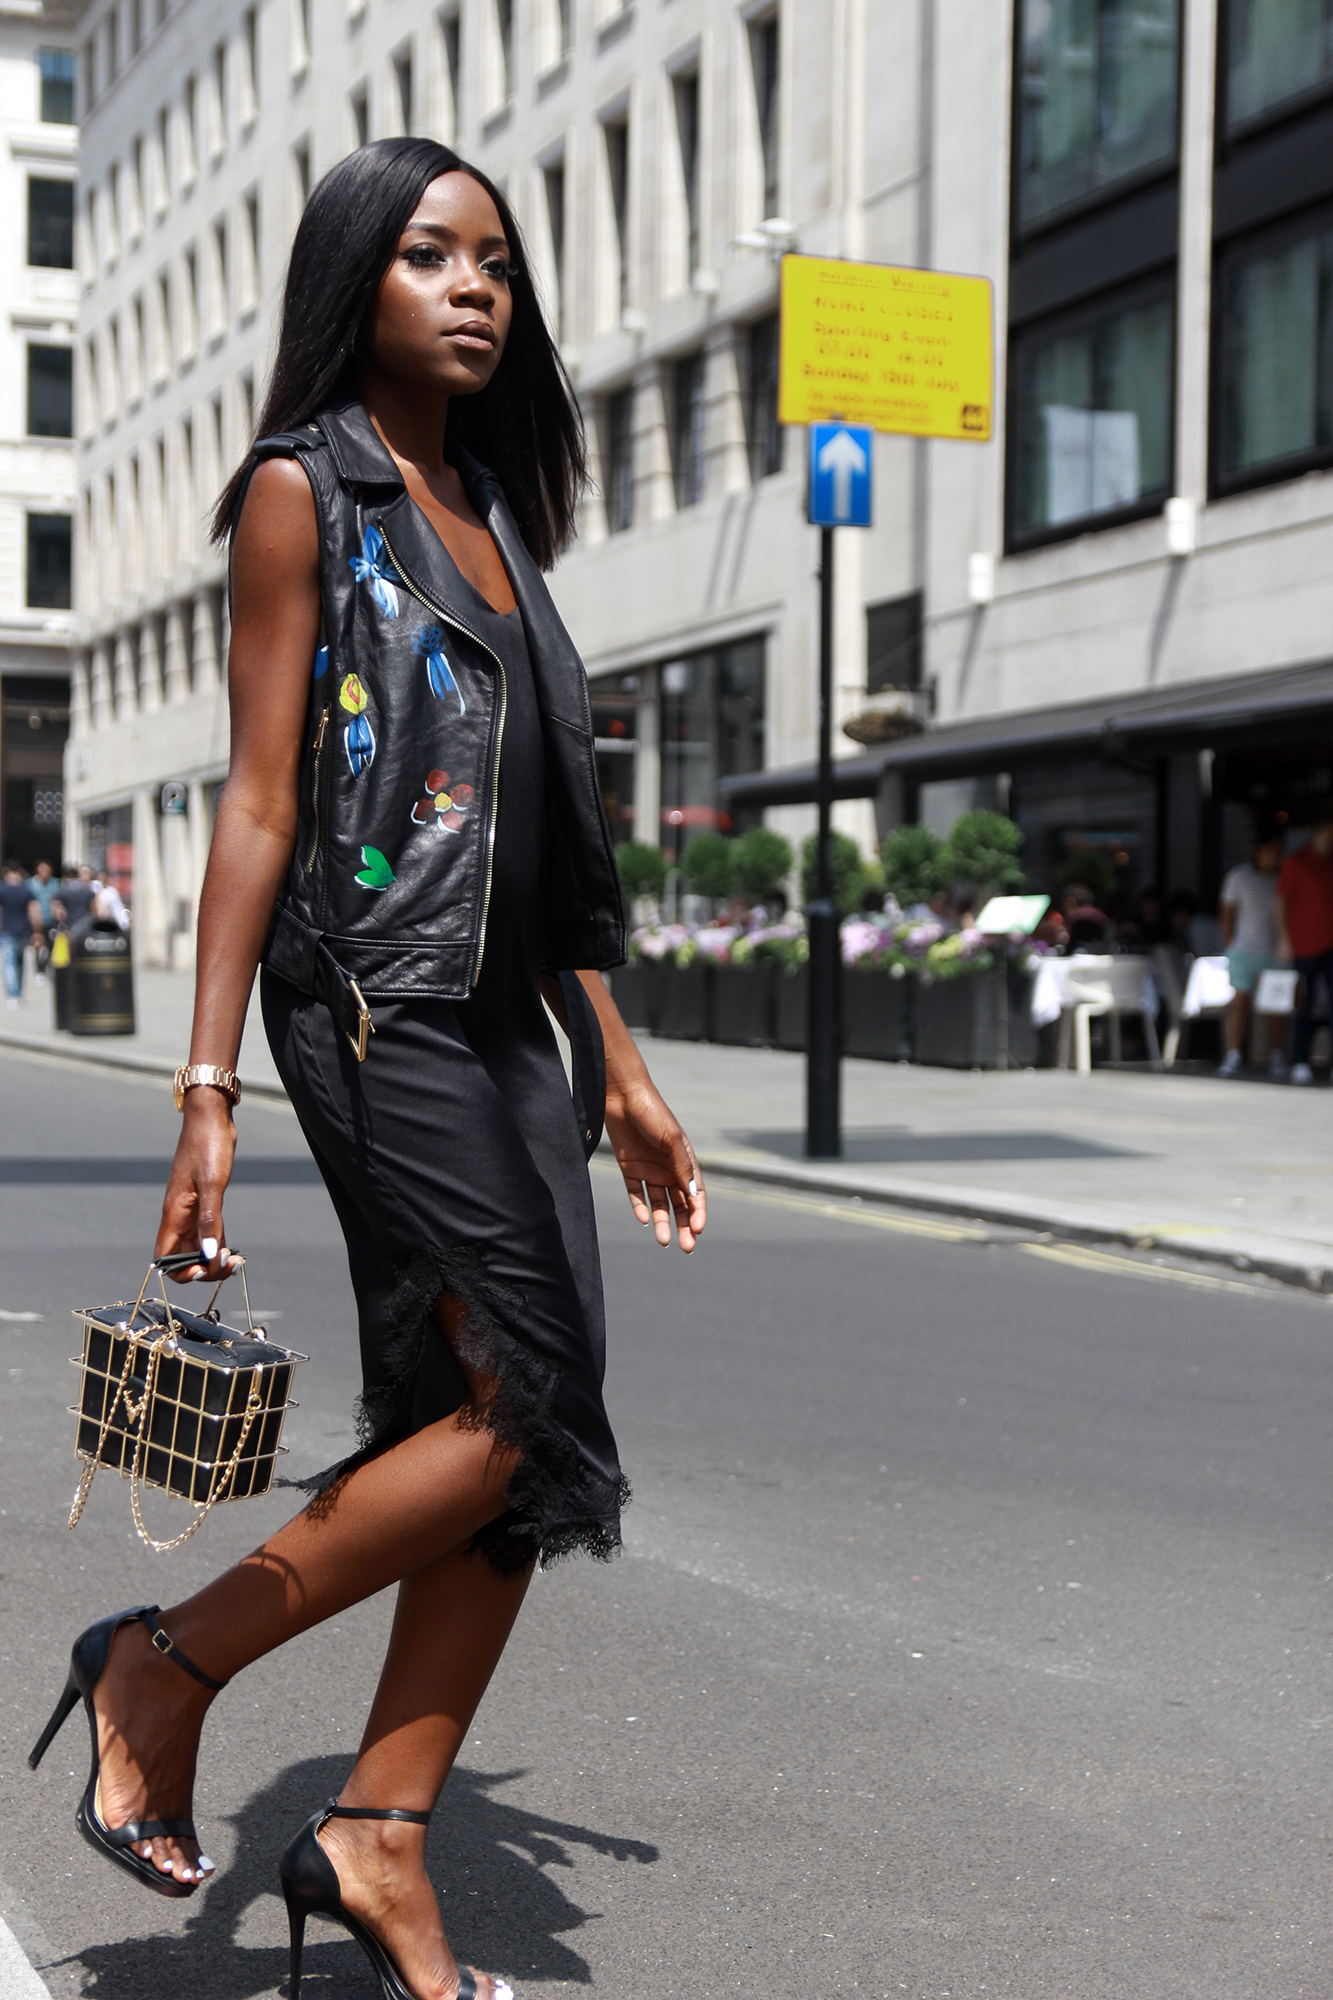 All black summer city outfit featuring a sleeveless jacket by Silvian Heach.